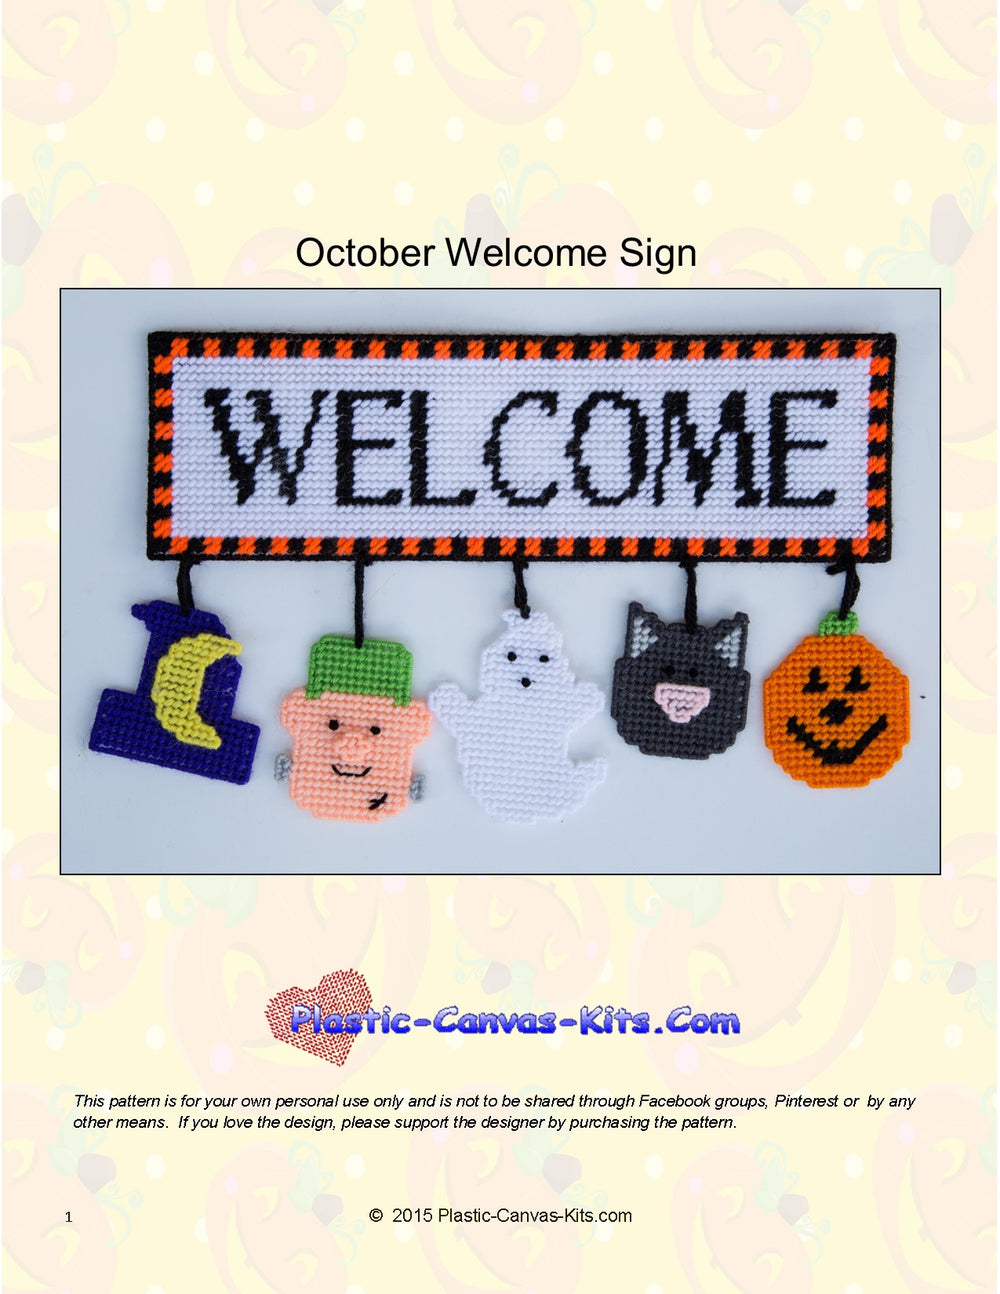 October Welcome Sign